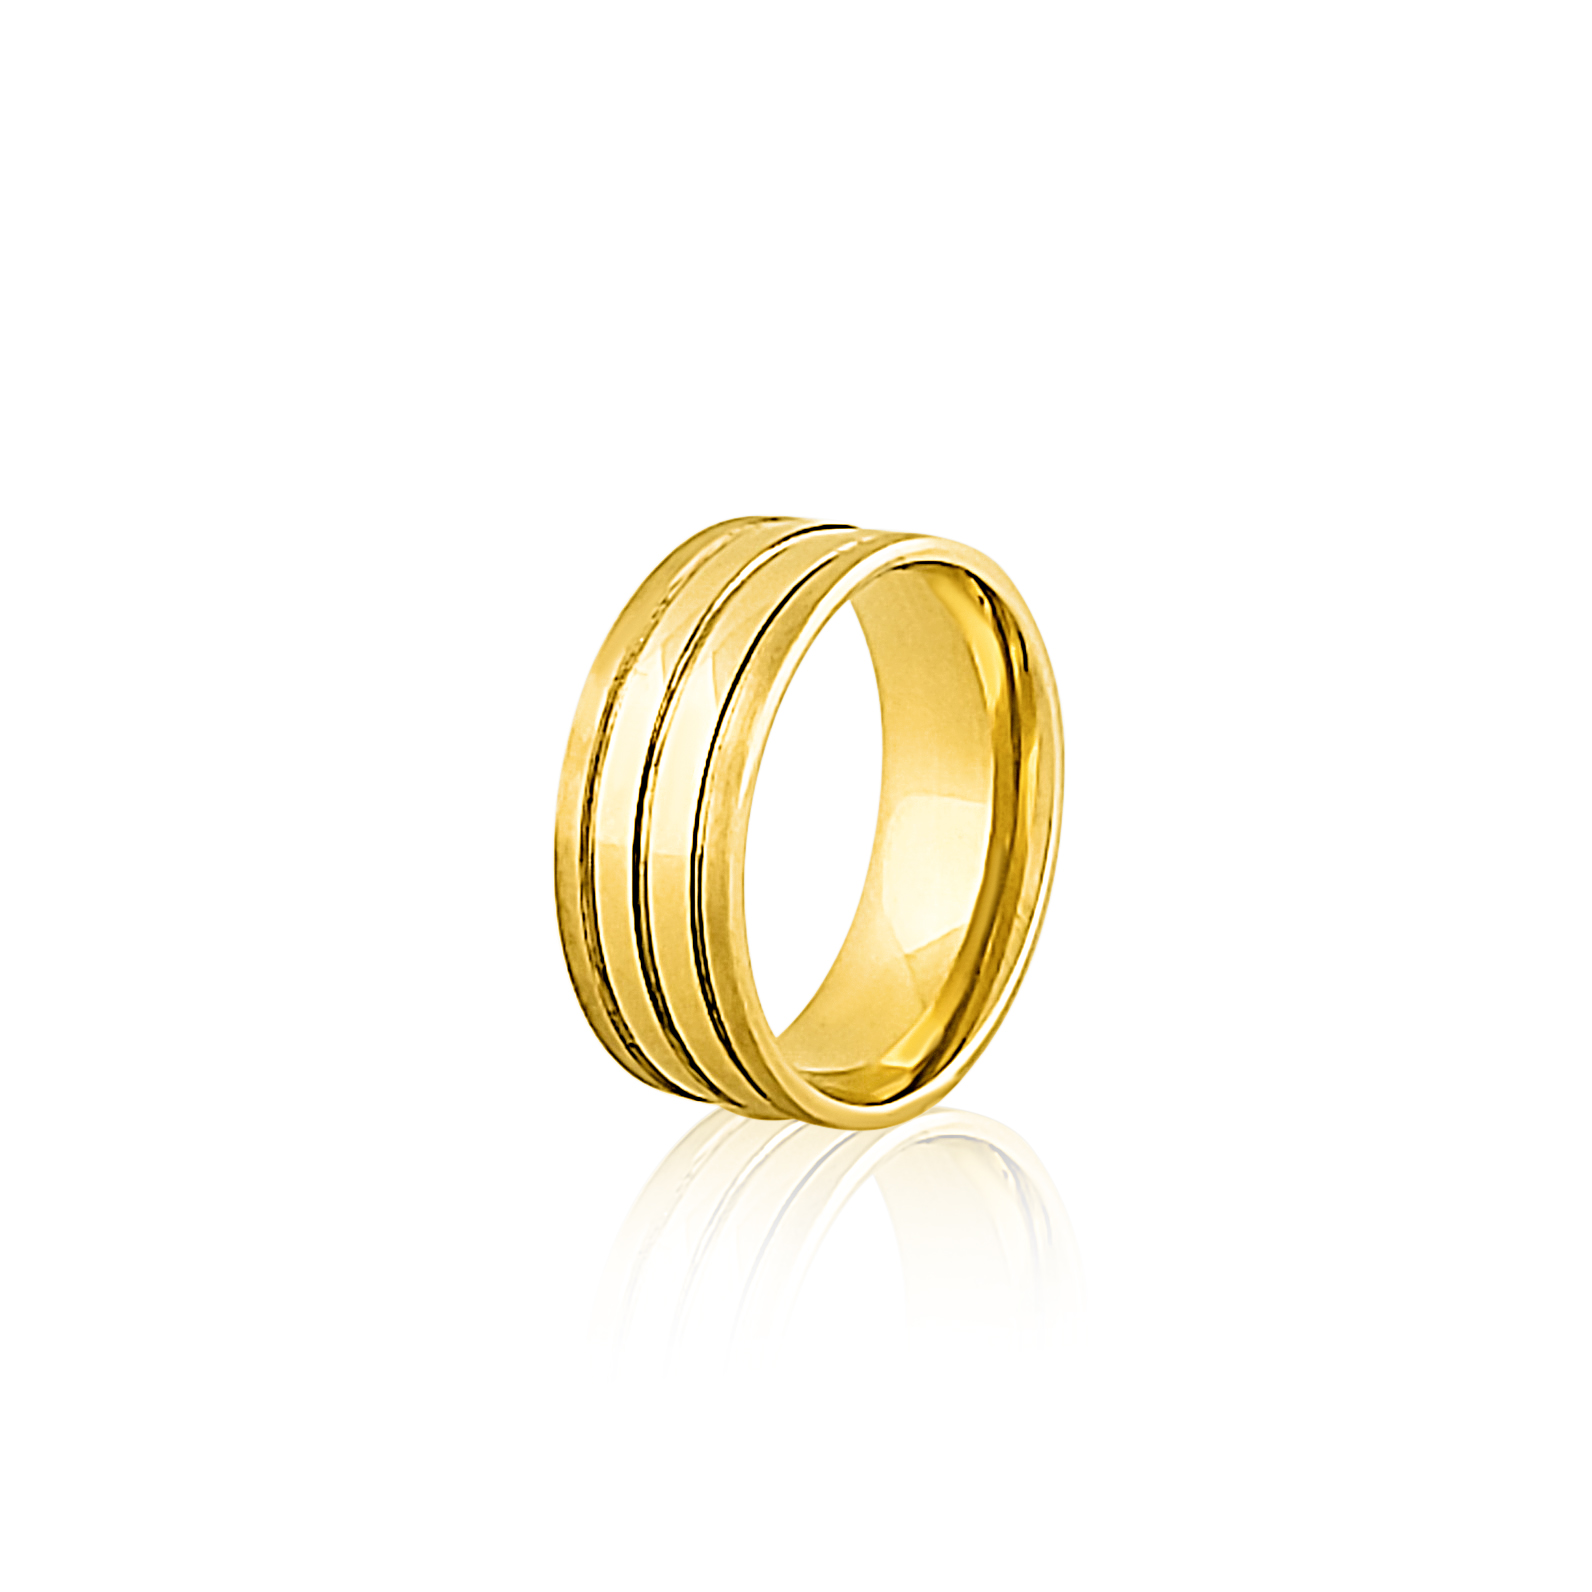 22k Lined Ring 12.5g | OM Jewellers